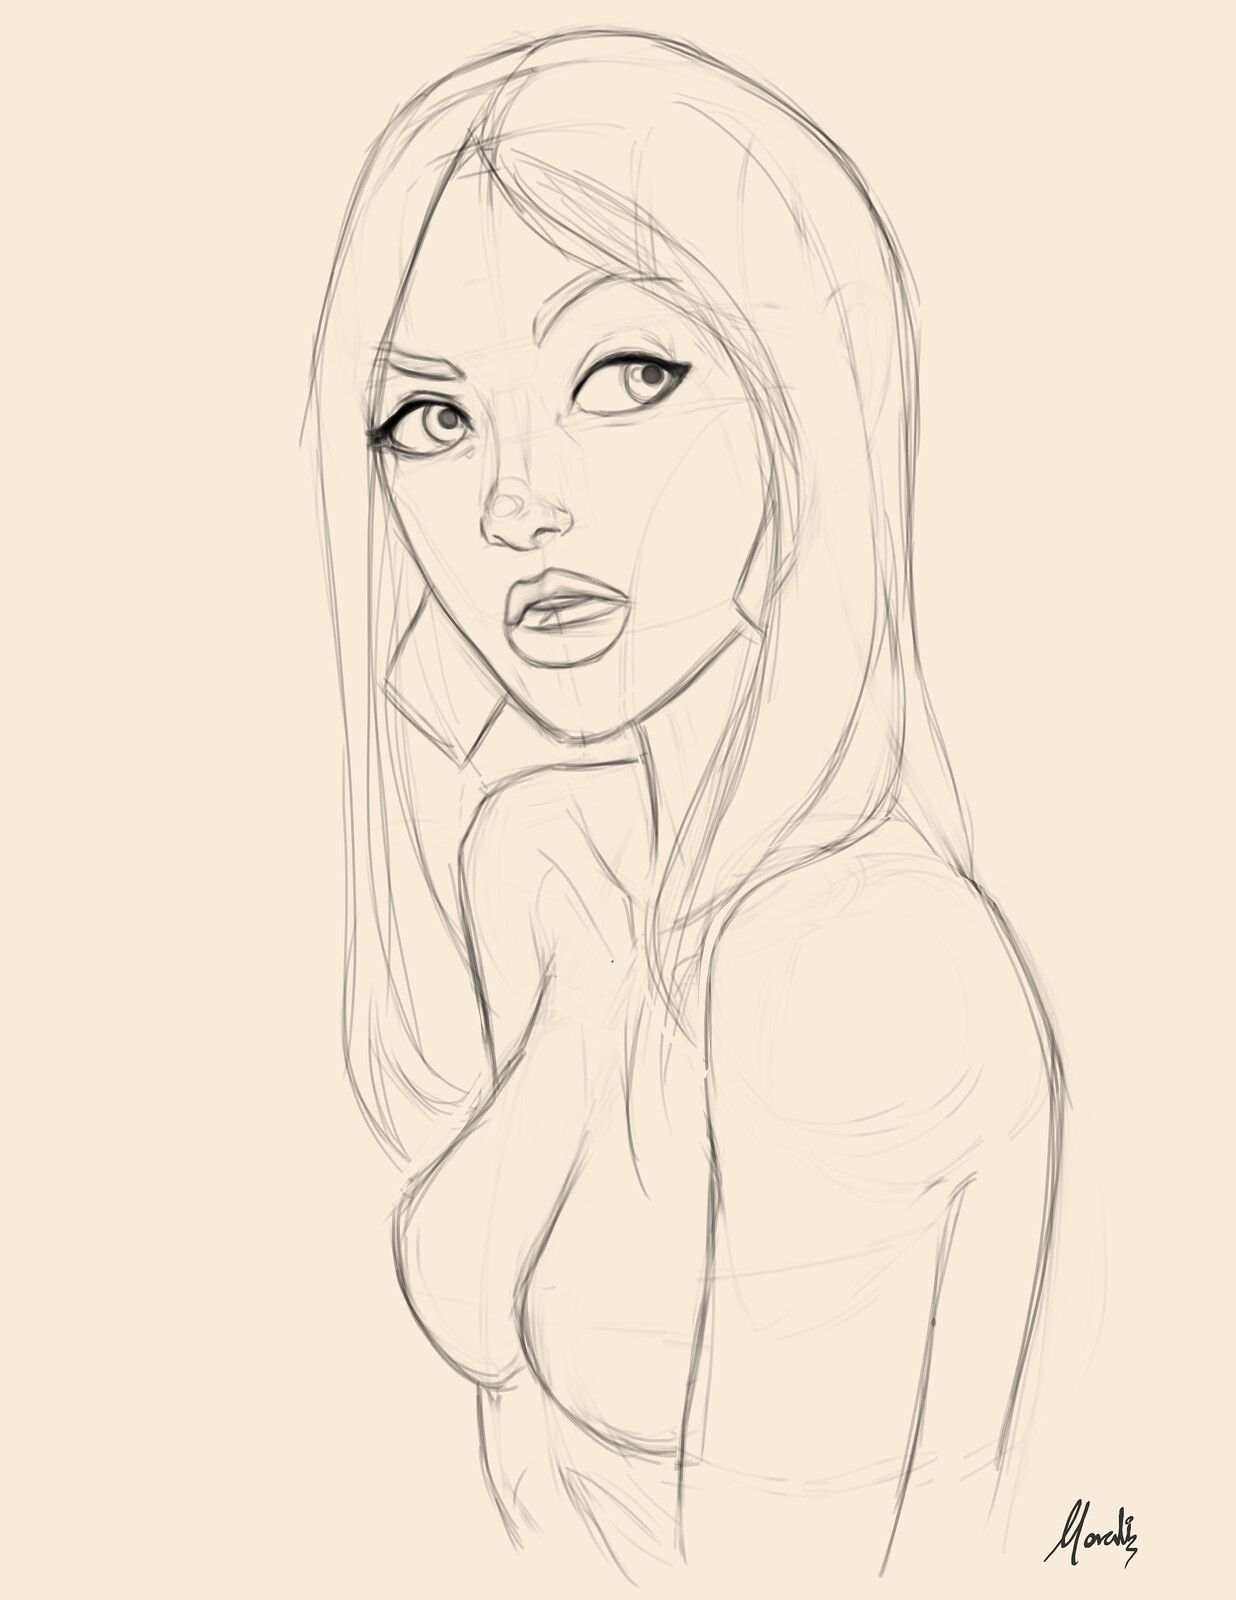 The initial sketch, then I decided to go closer and crop her a bit.